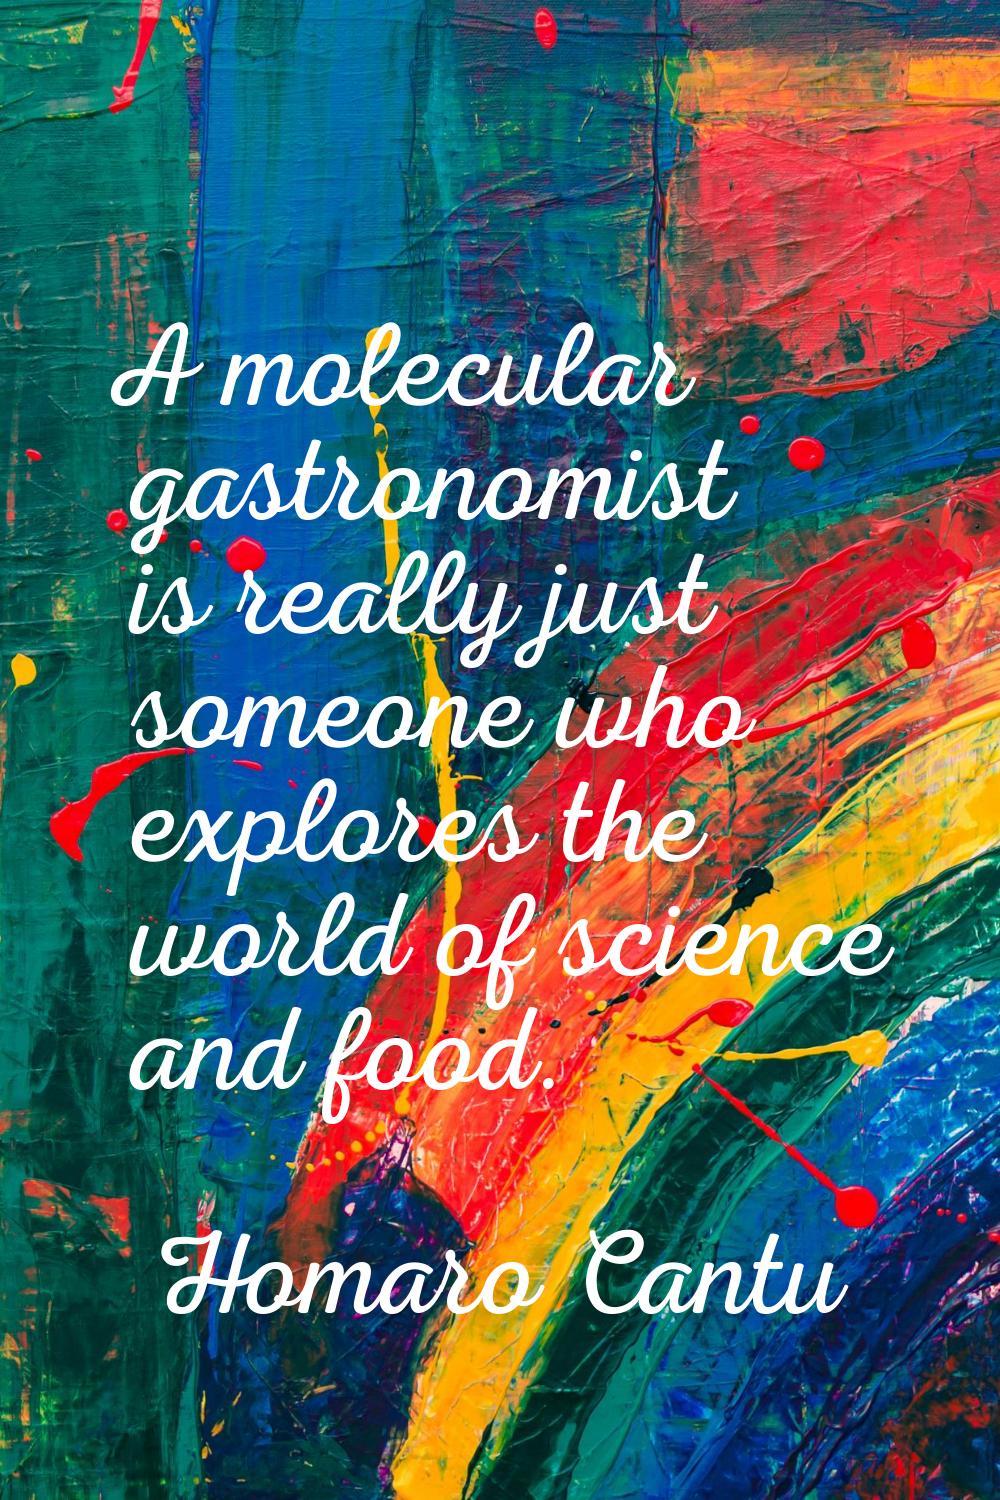 A molecular gastronomist is really just someone who explores the world of science and food.